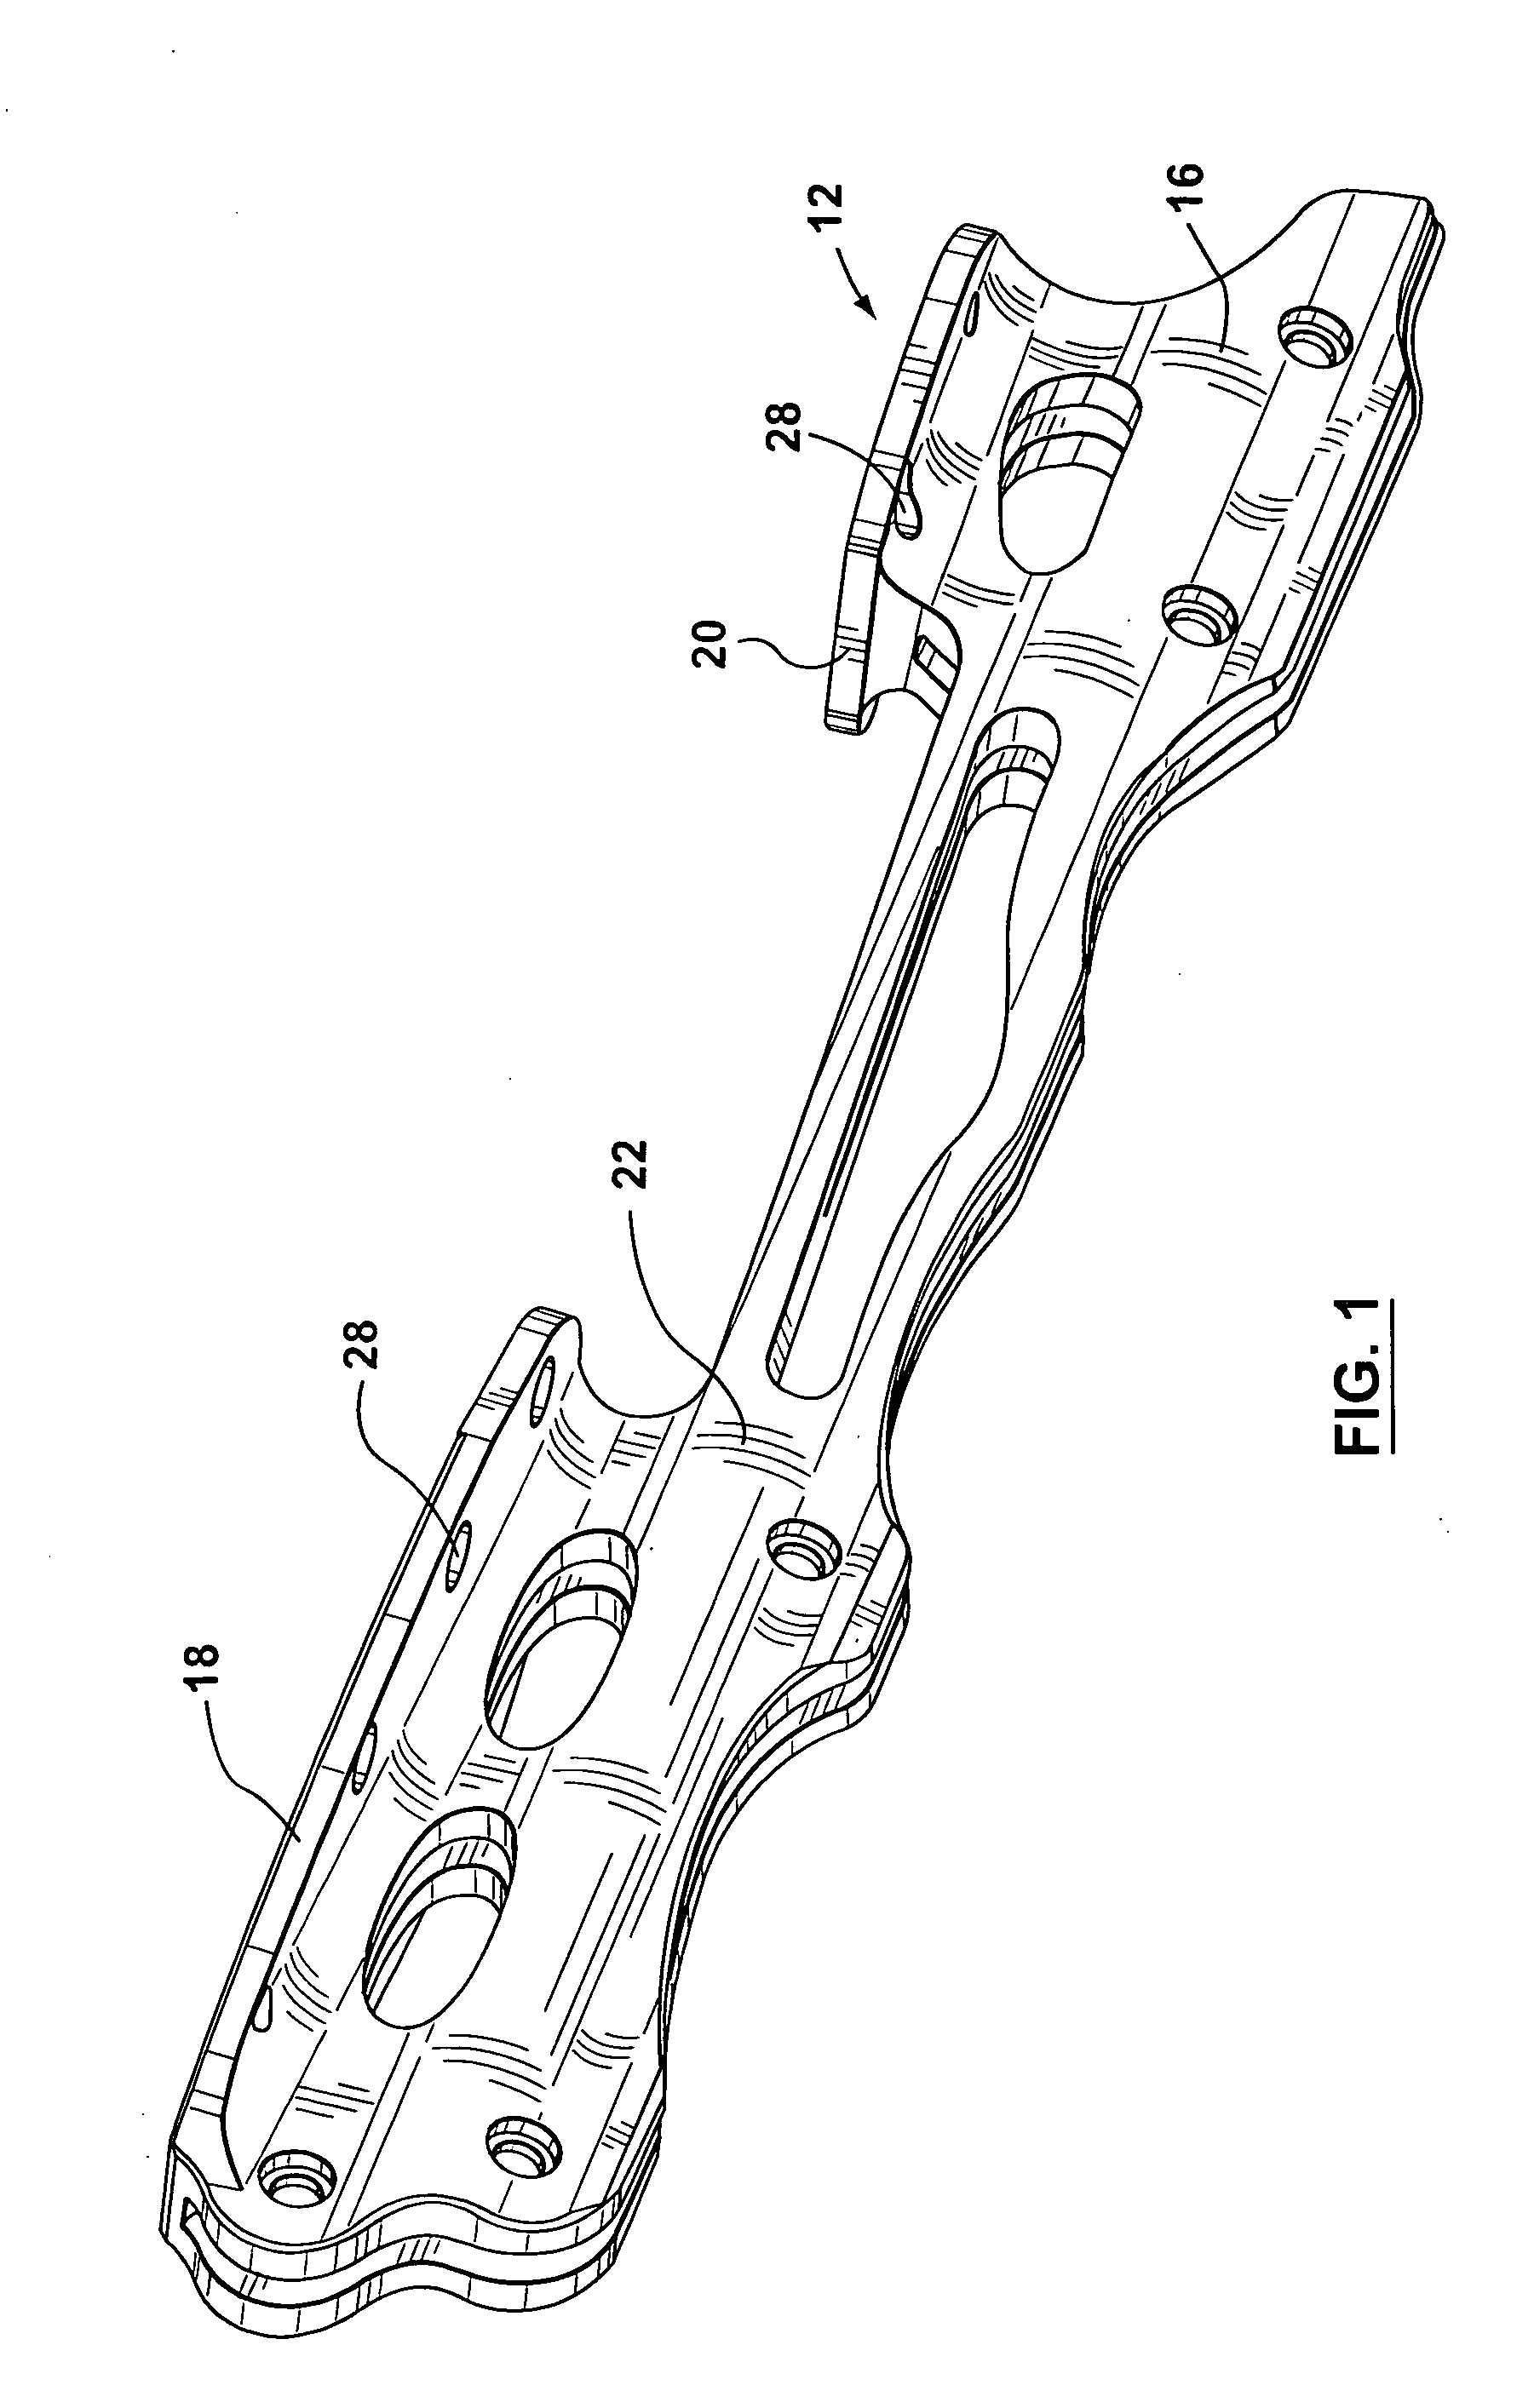 Extruded light-weight figure skate blade holder with two part blade